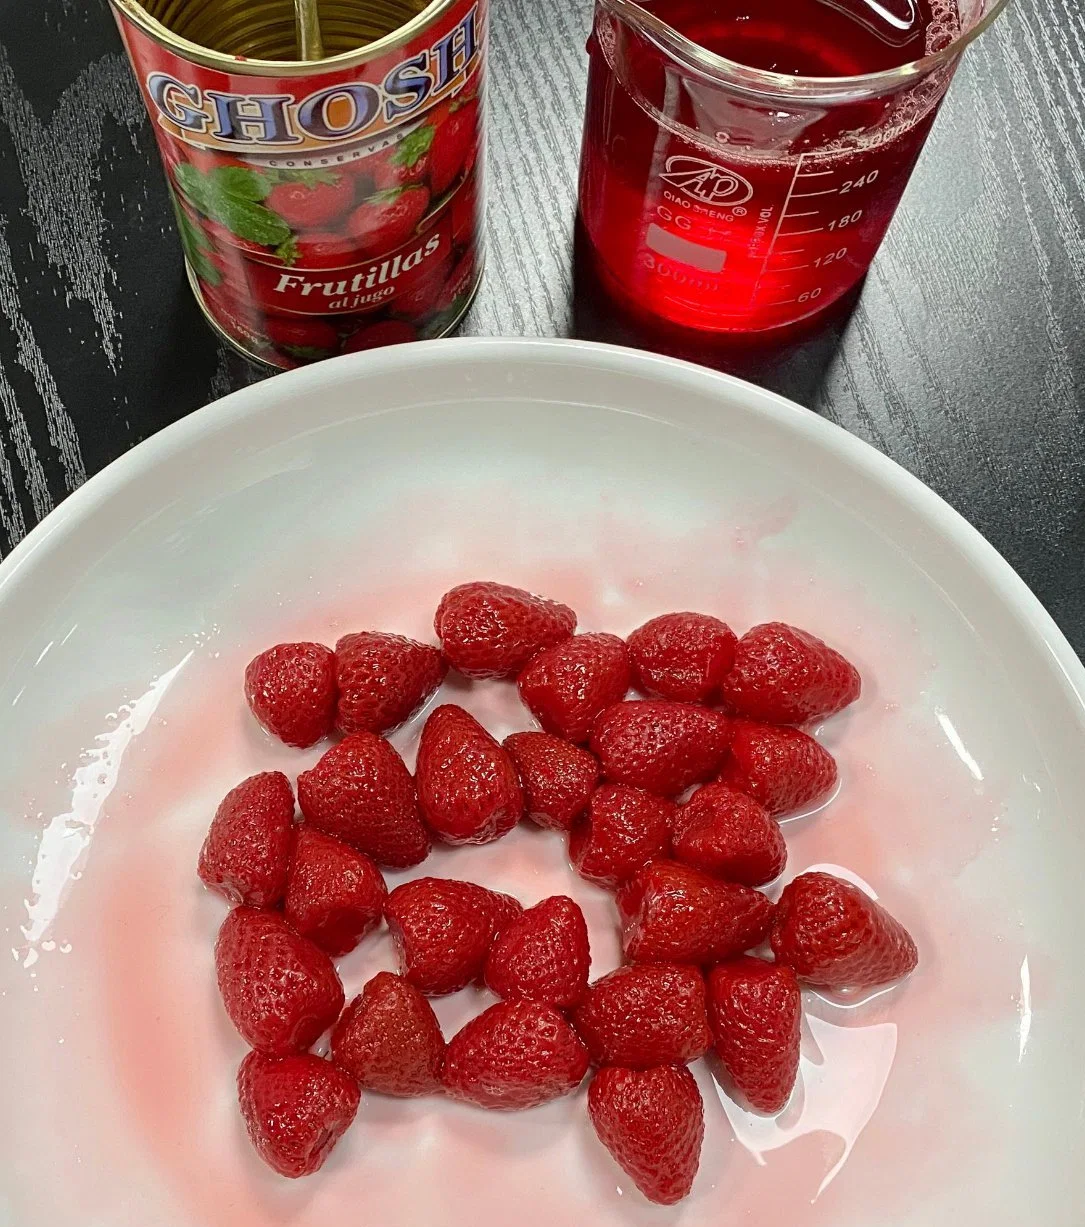 China Health Food Canned Strawberry in Syrup